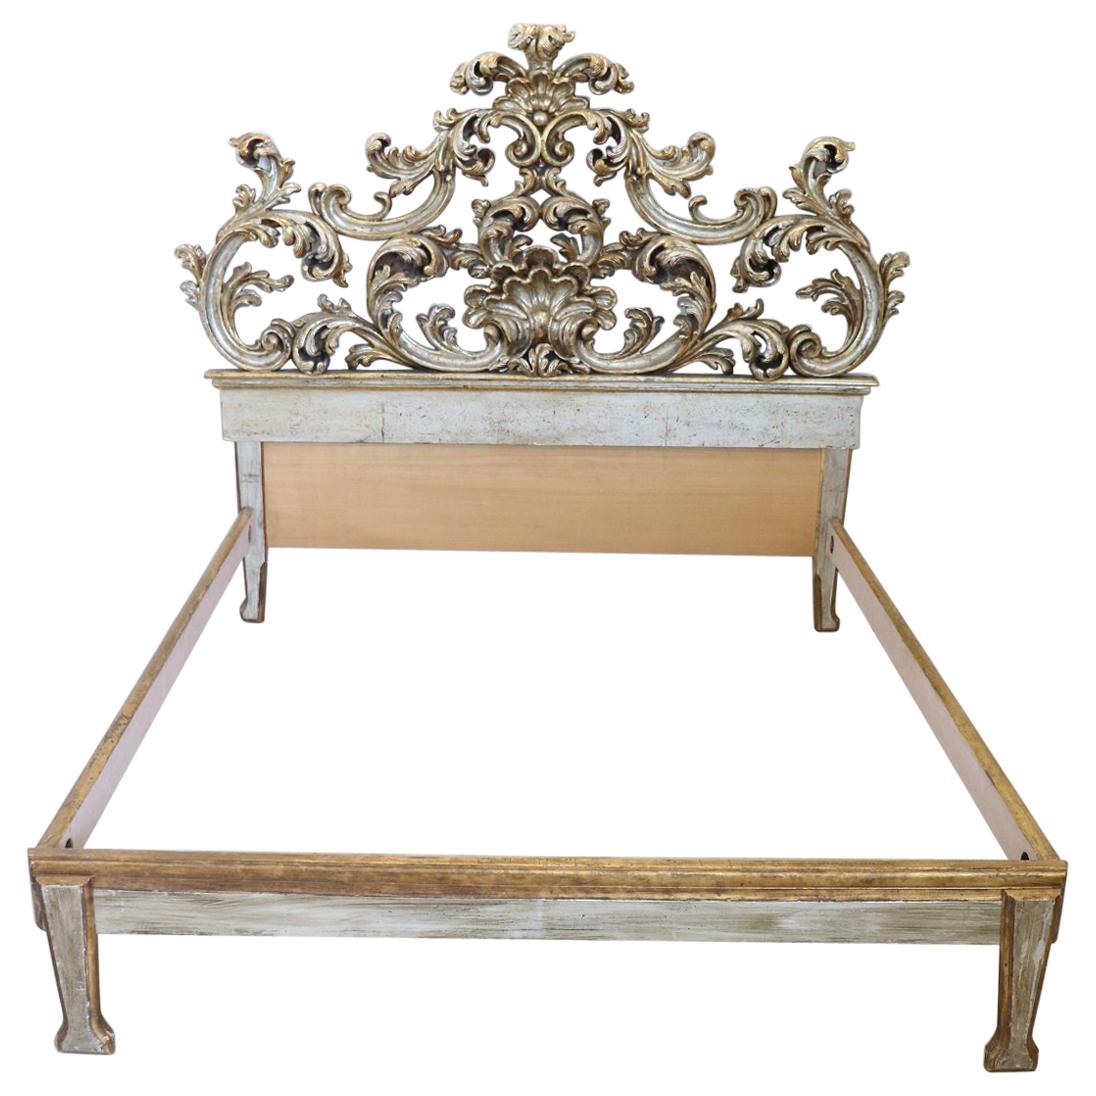 20th Century Italian Baroque Style Carved Gilded and Silvered Wood Double Bed